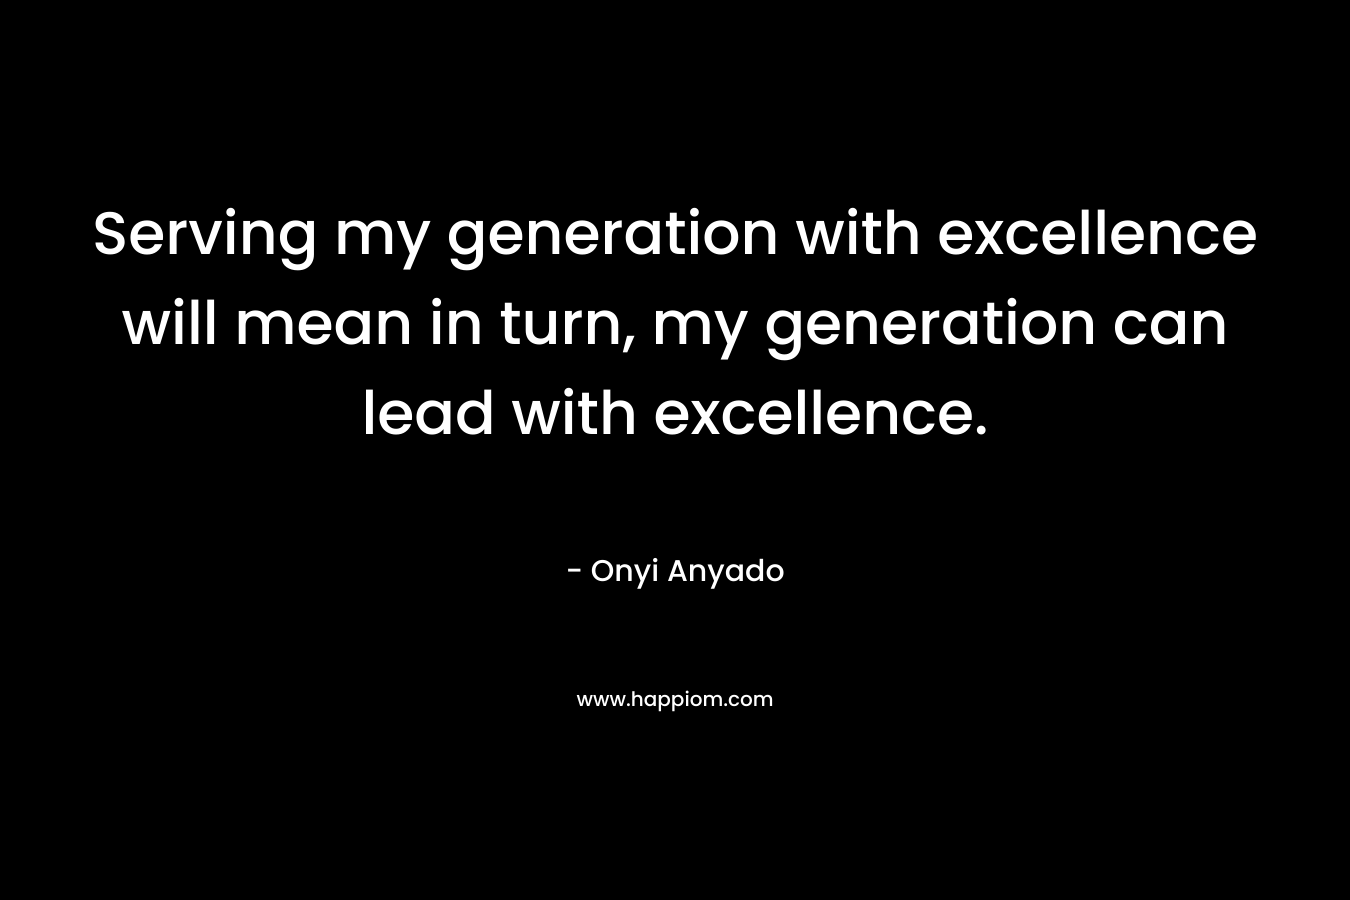 Serving my generation with excellence will mean in turn, my generation can lead with excellence.